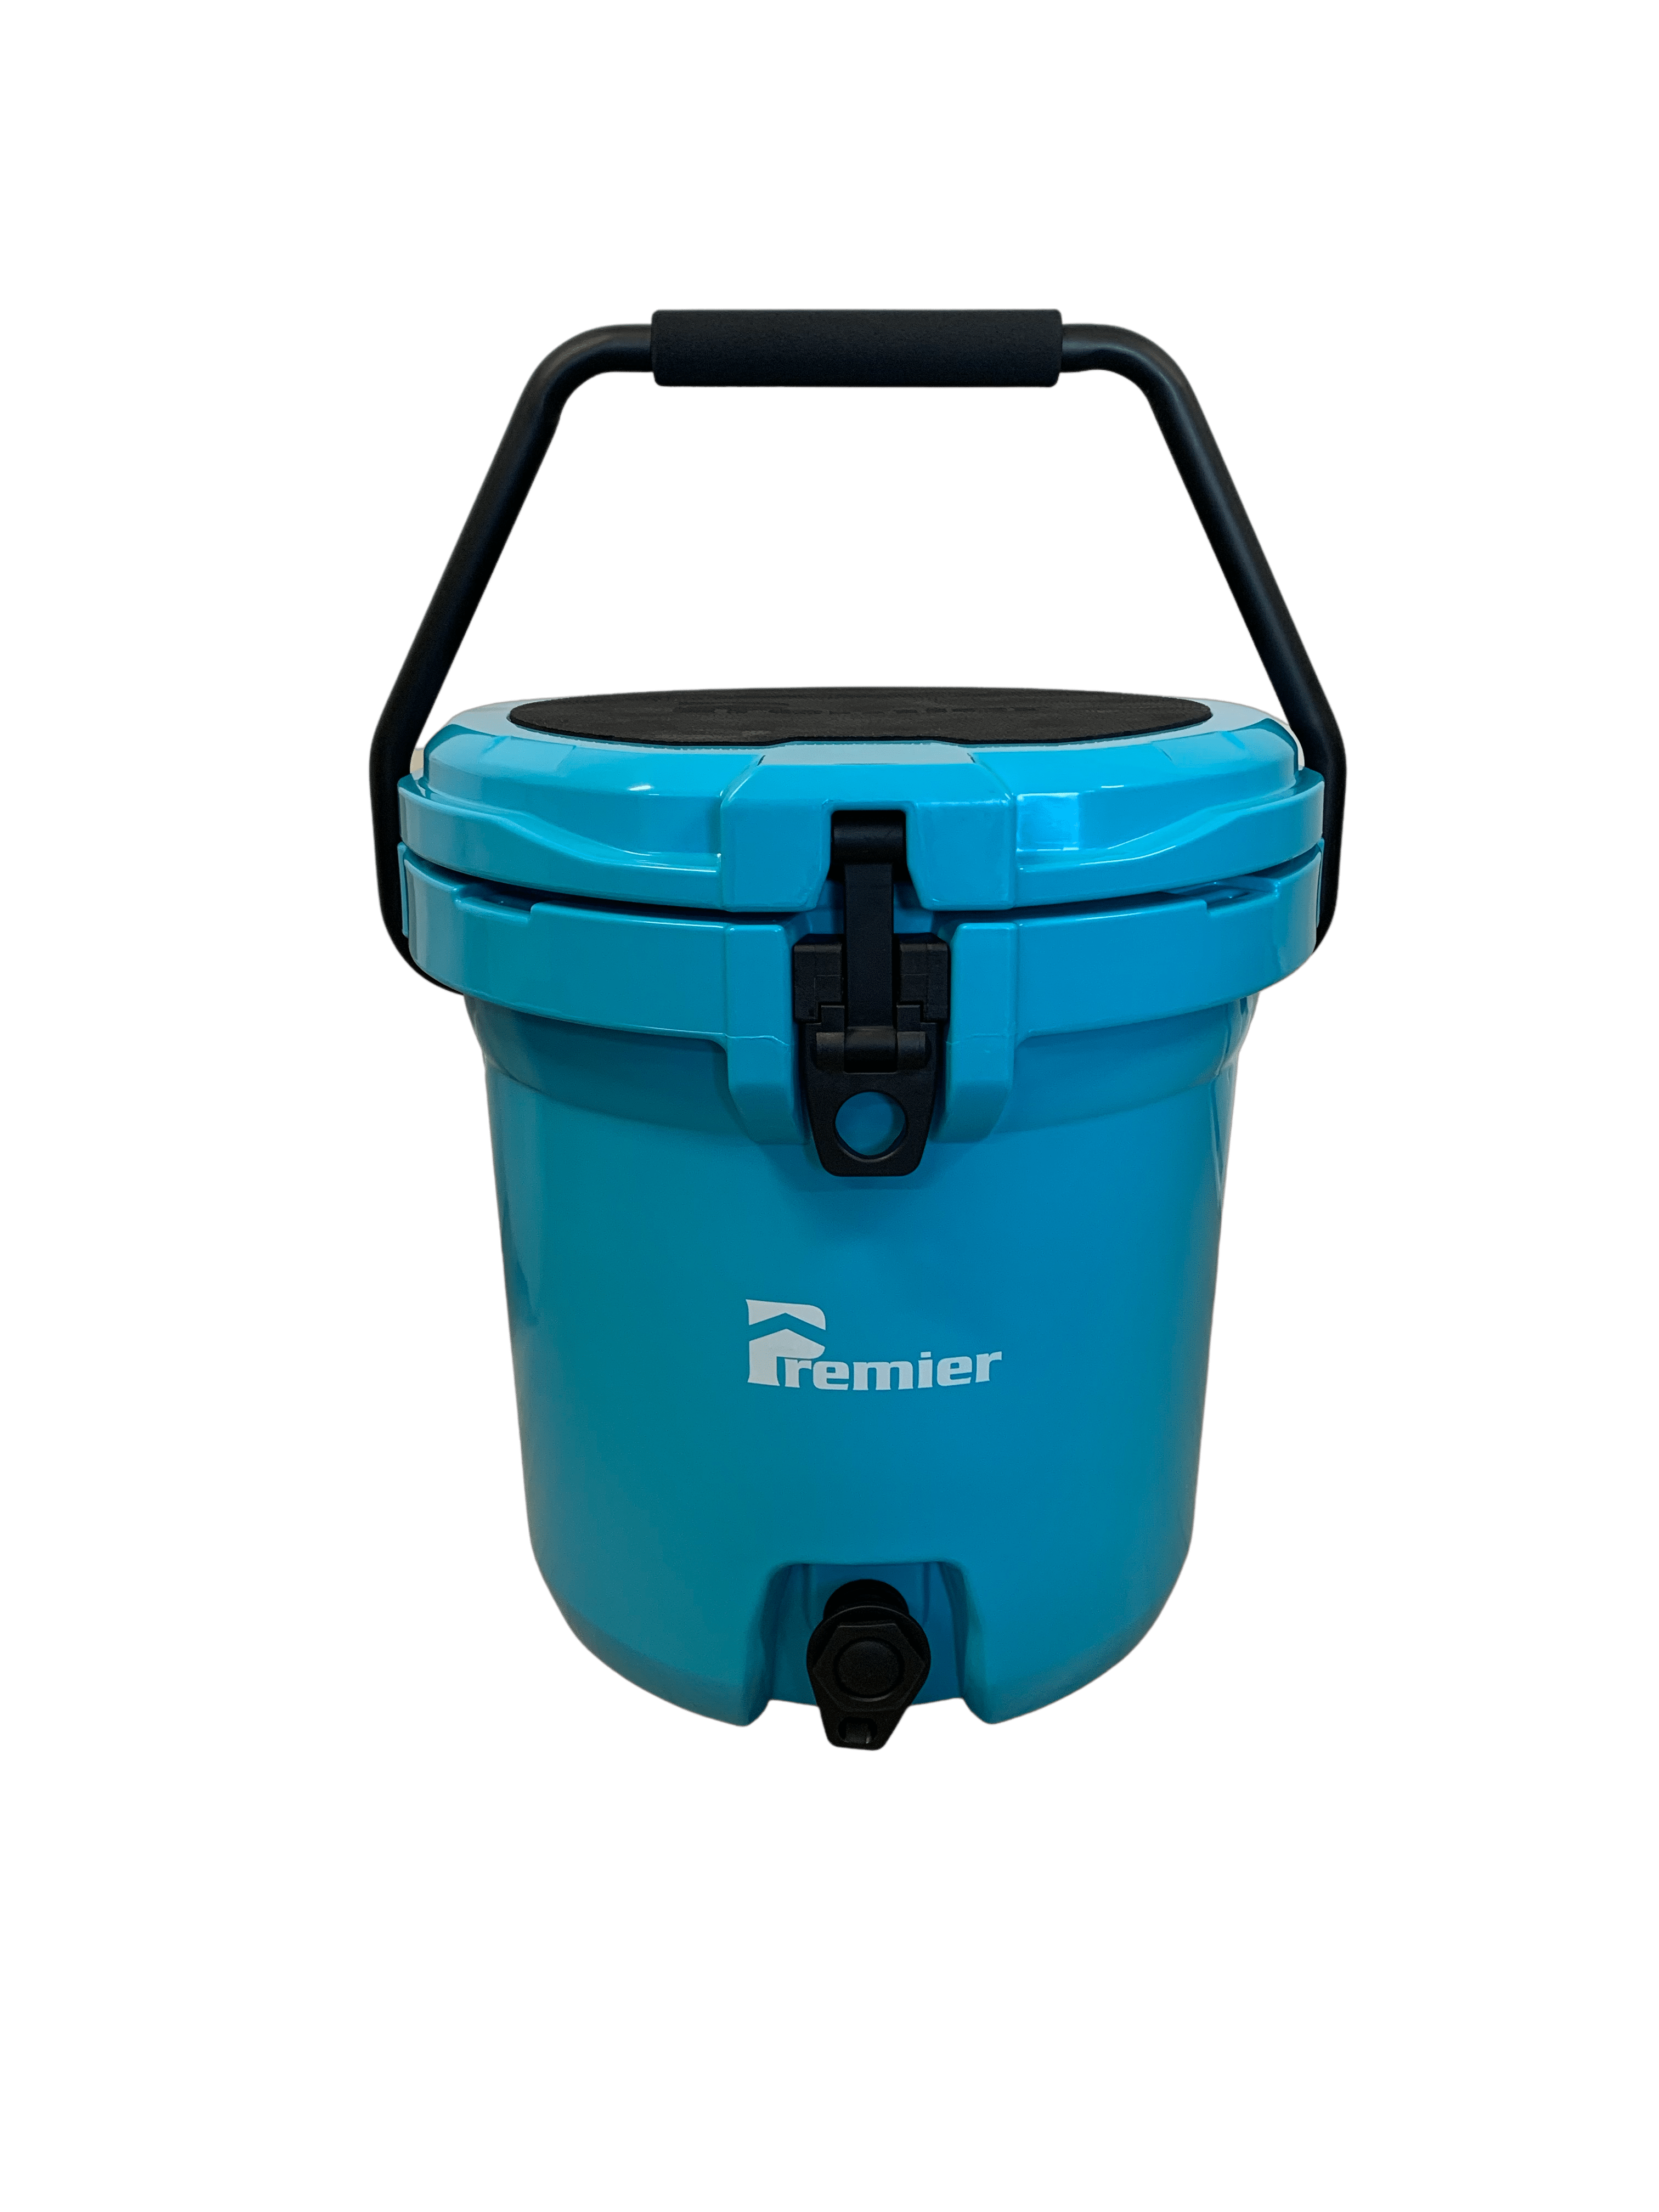 Premier 2 in 1 SUP Seat and Rotomolded 5 Gallon Cooler - Keeps